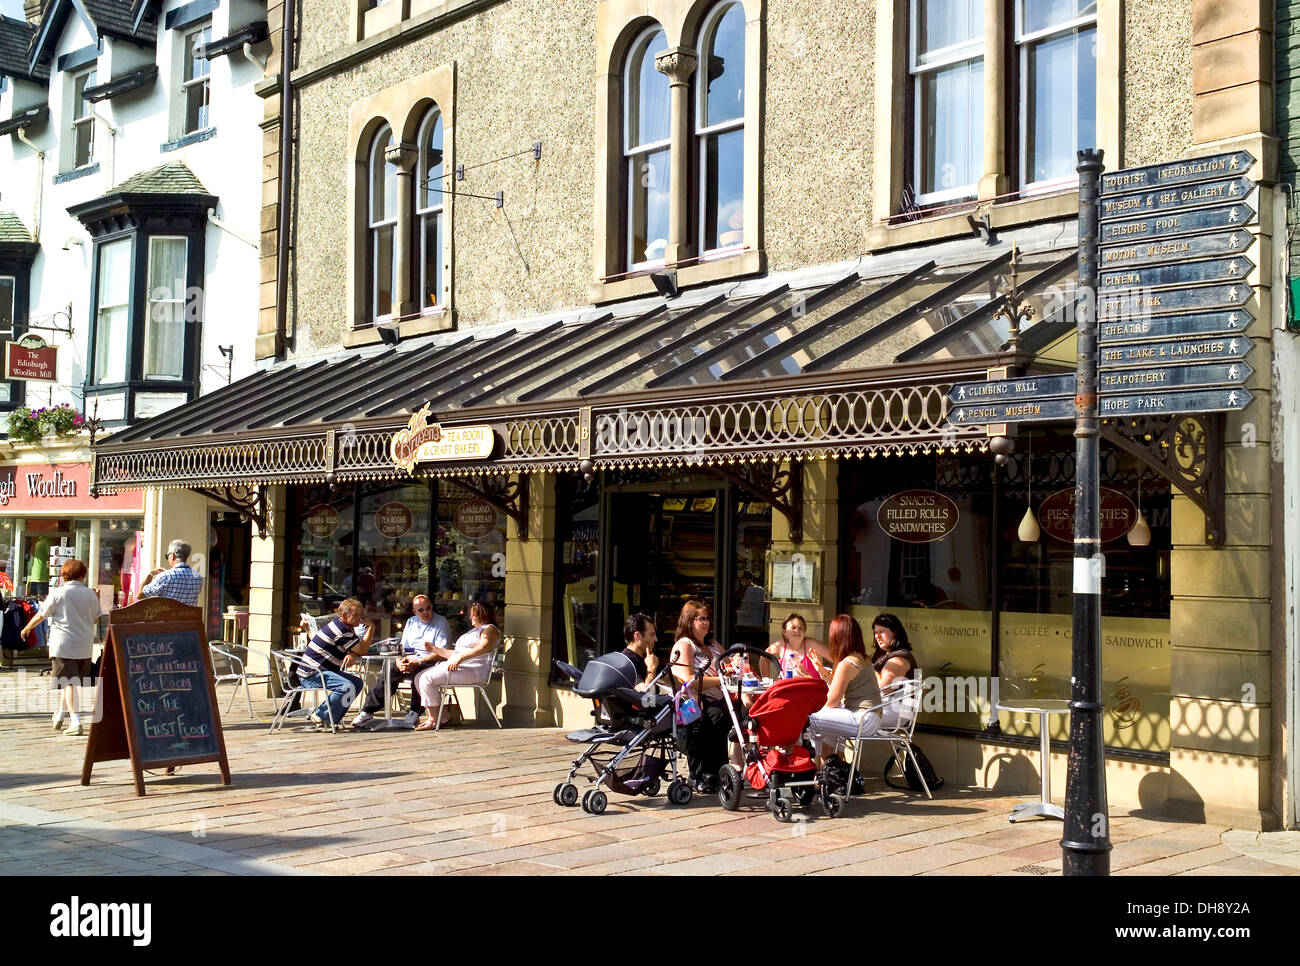 Cafe Keswick High Resolution Stock Photography and Images - Alamy